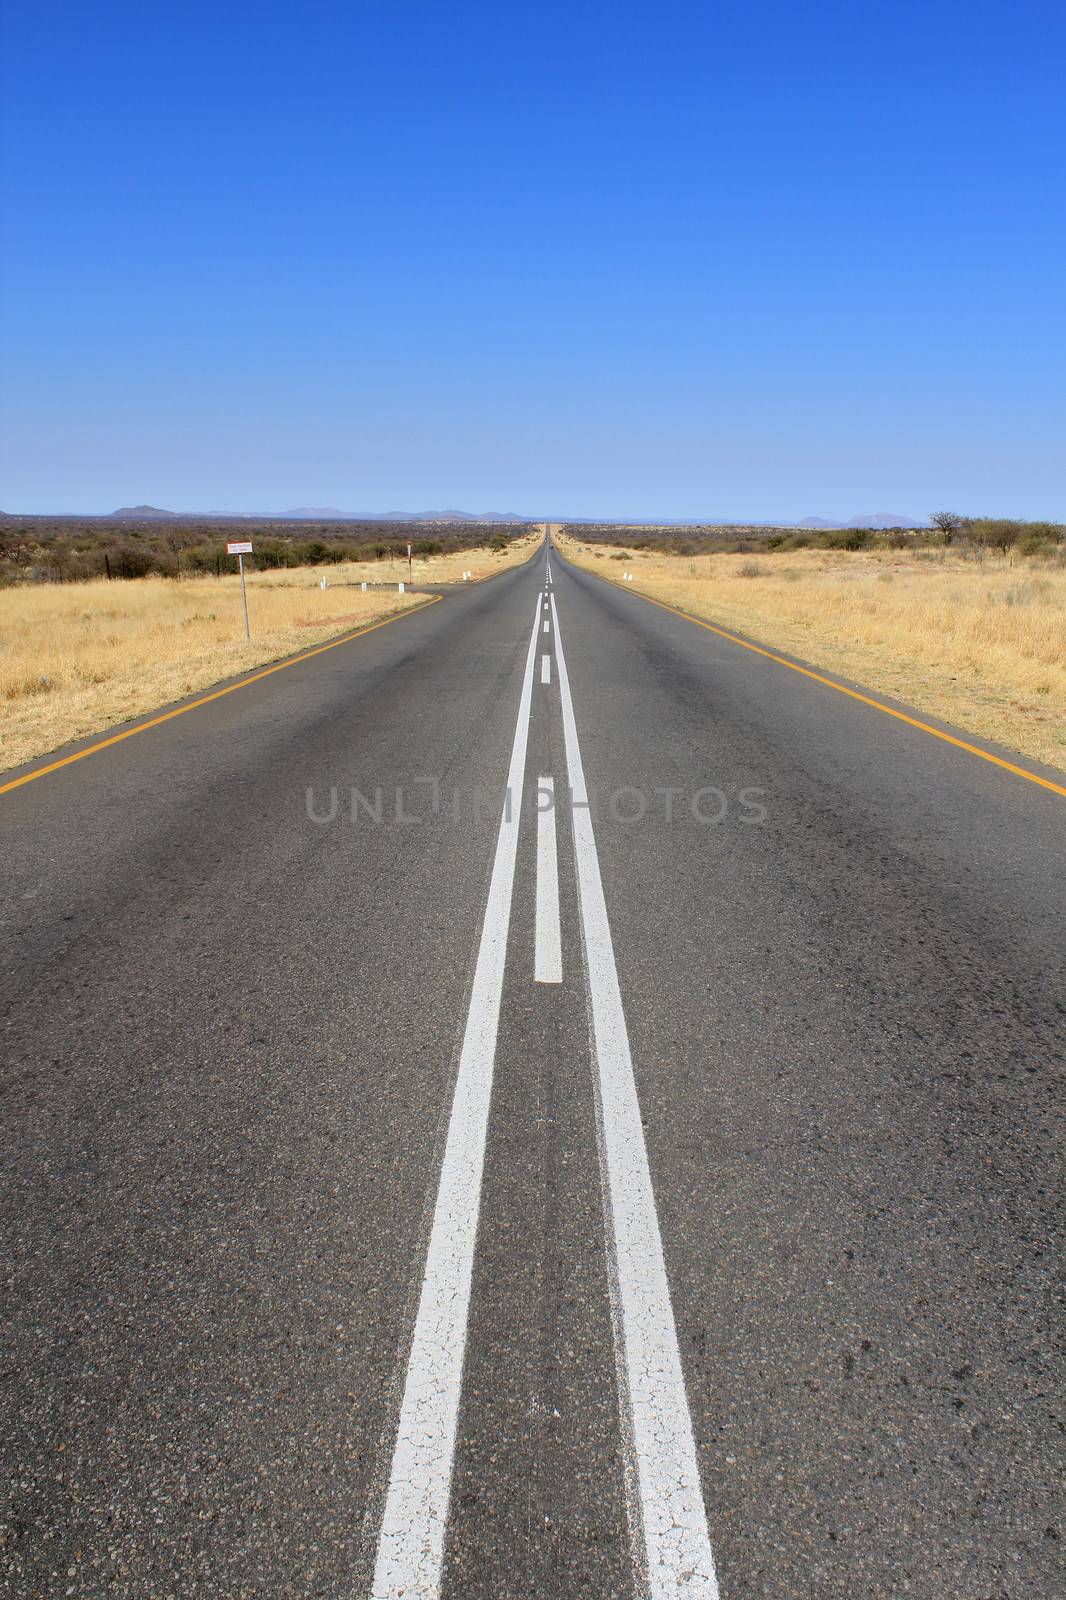 B1 road in Namibia heading toward Sesriem and Sossusvlei by ptxgarfield